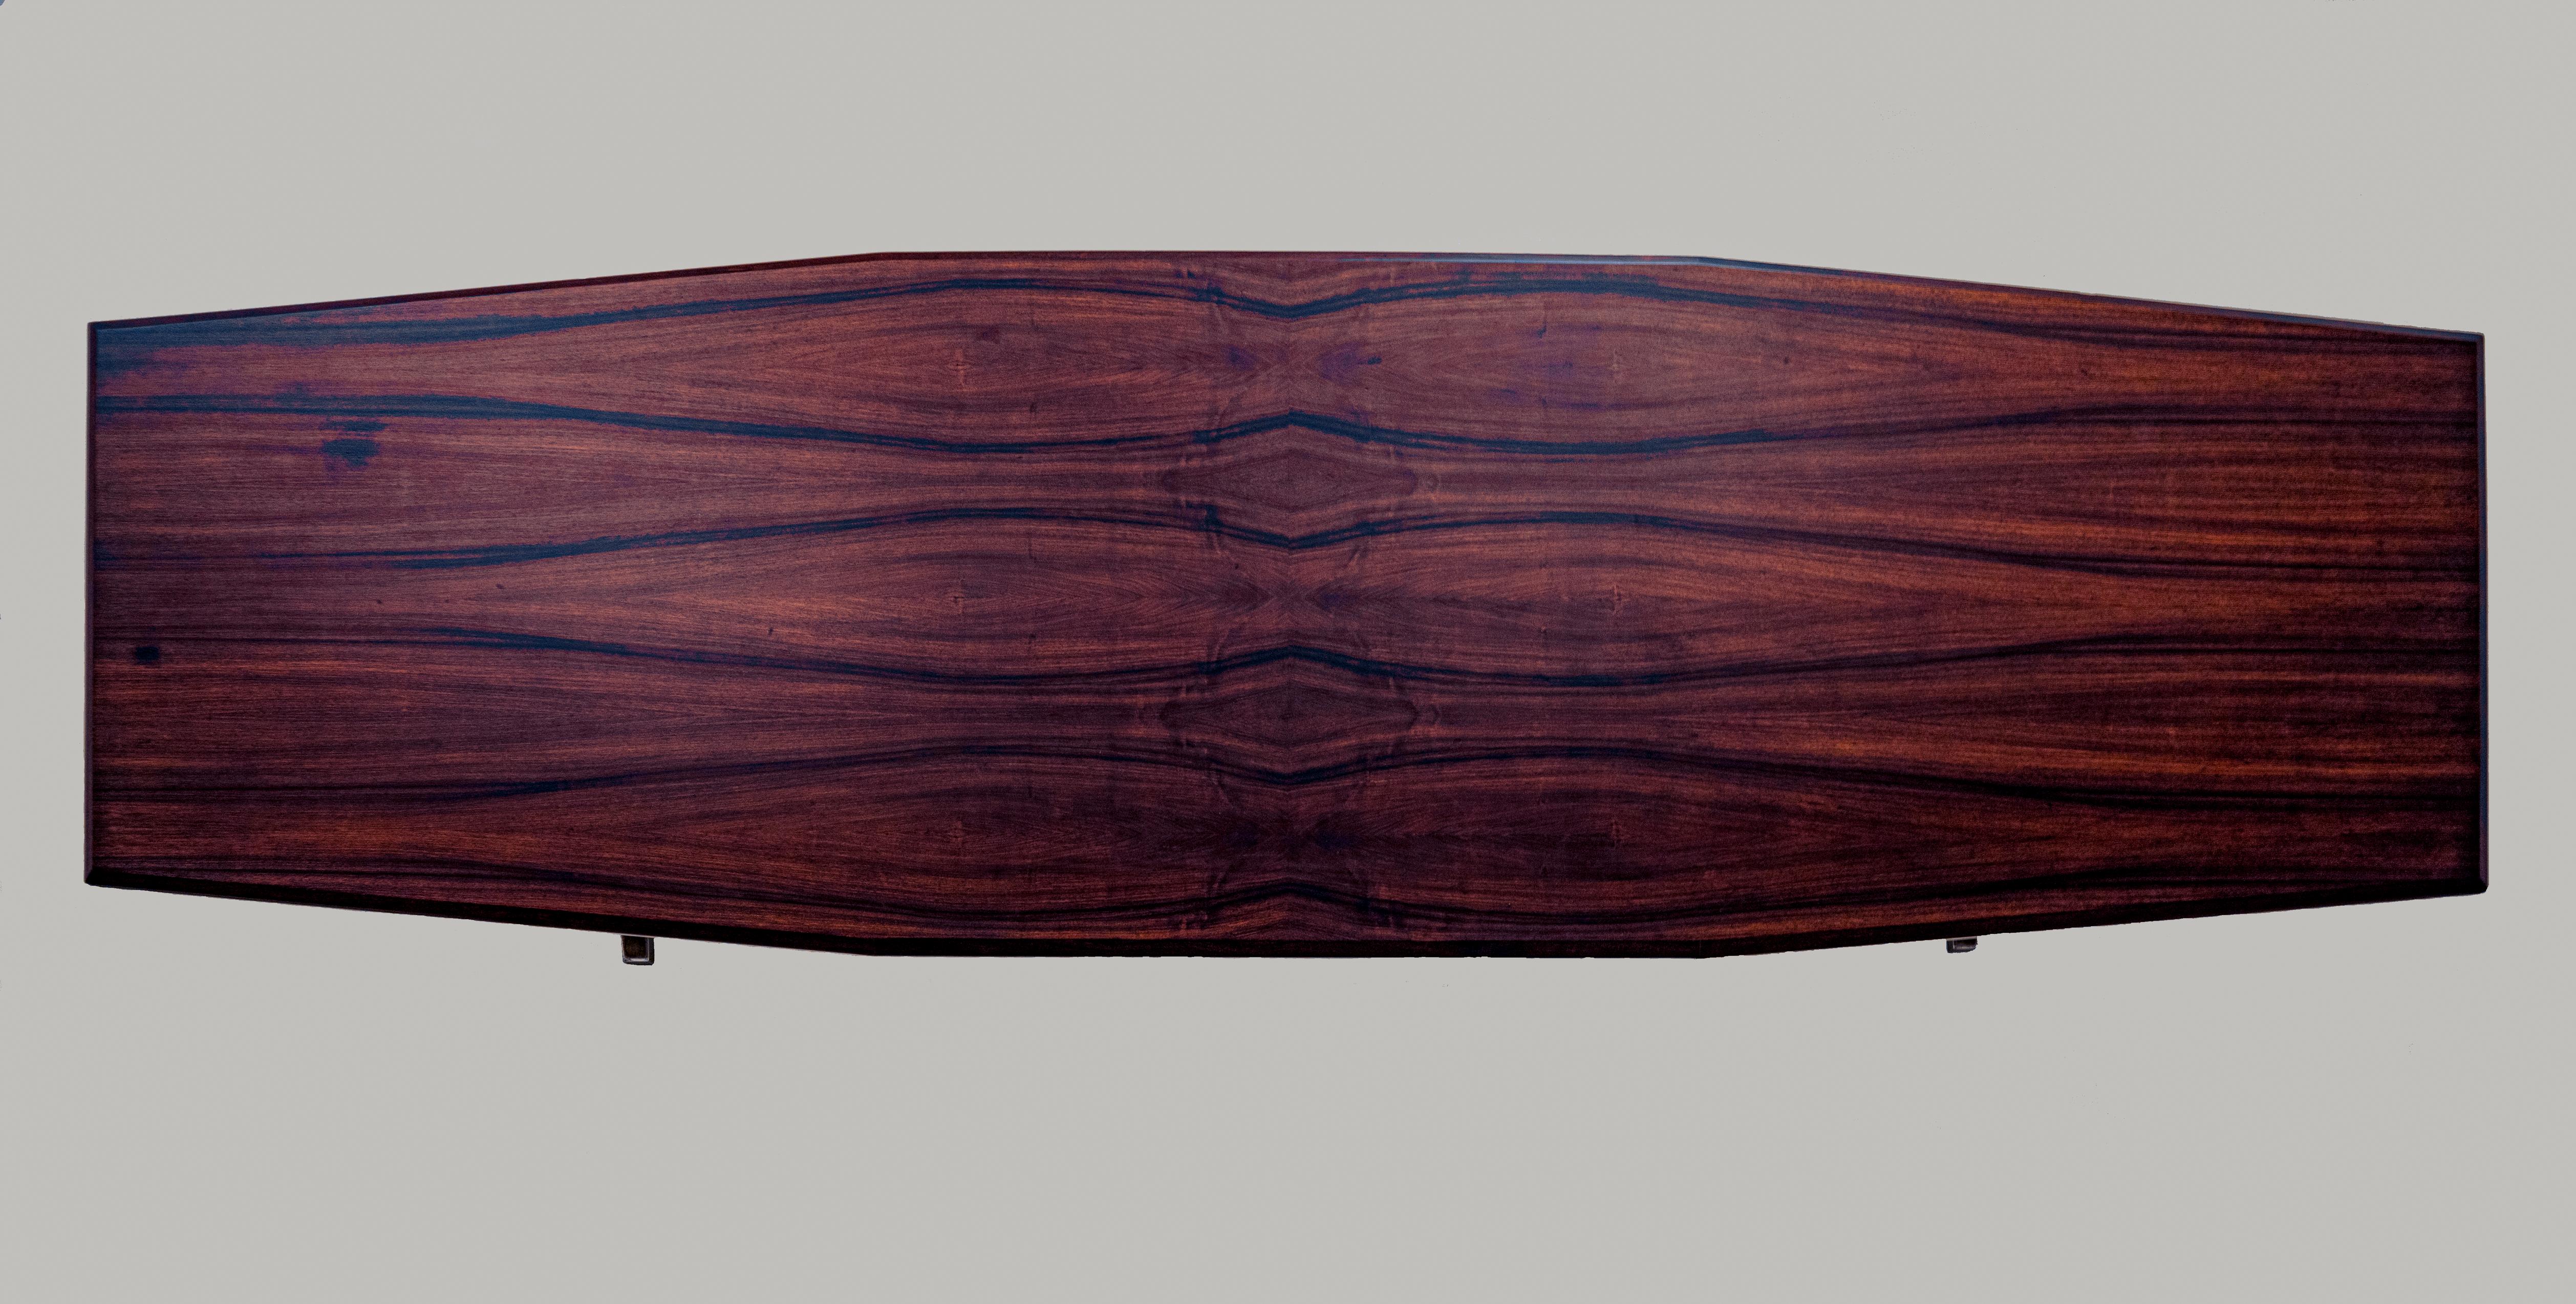 Mid-Century Modern Set of 2 'Pirellone' Rosewood Direction Tables by Gio Ponti for RIMA Italy, 1958